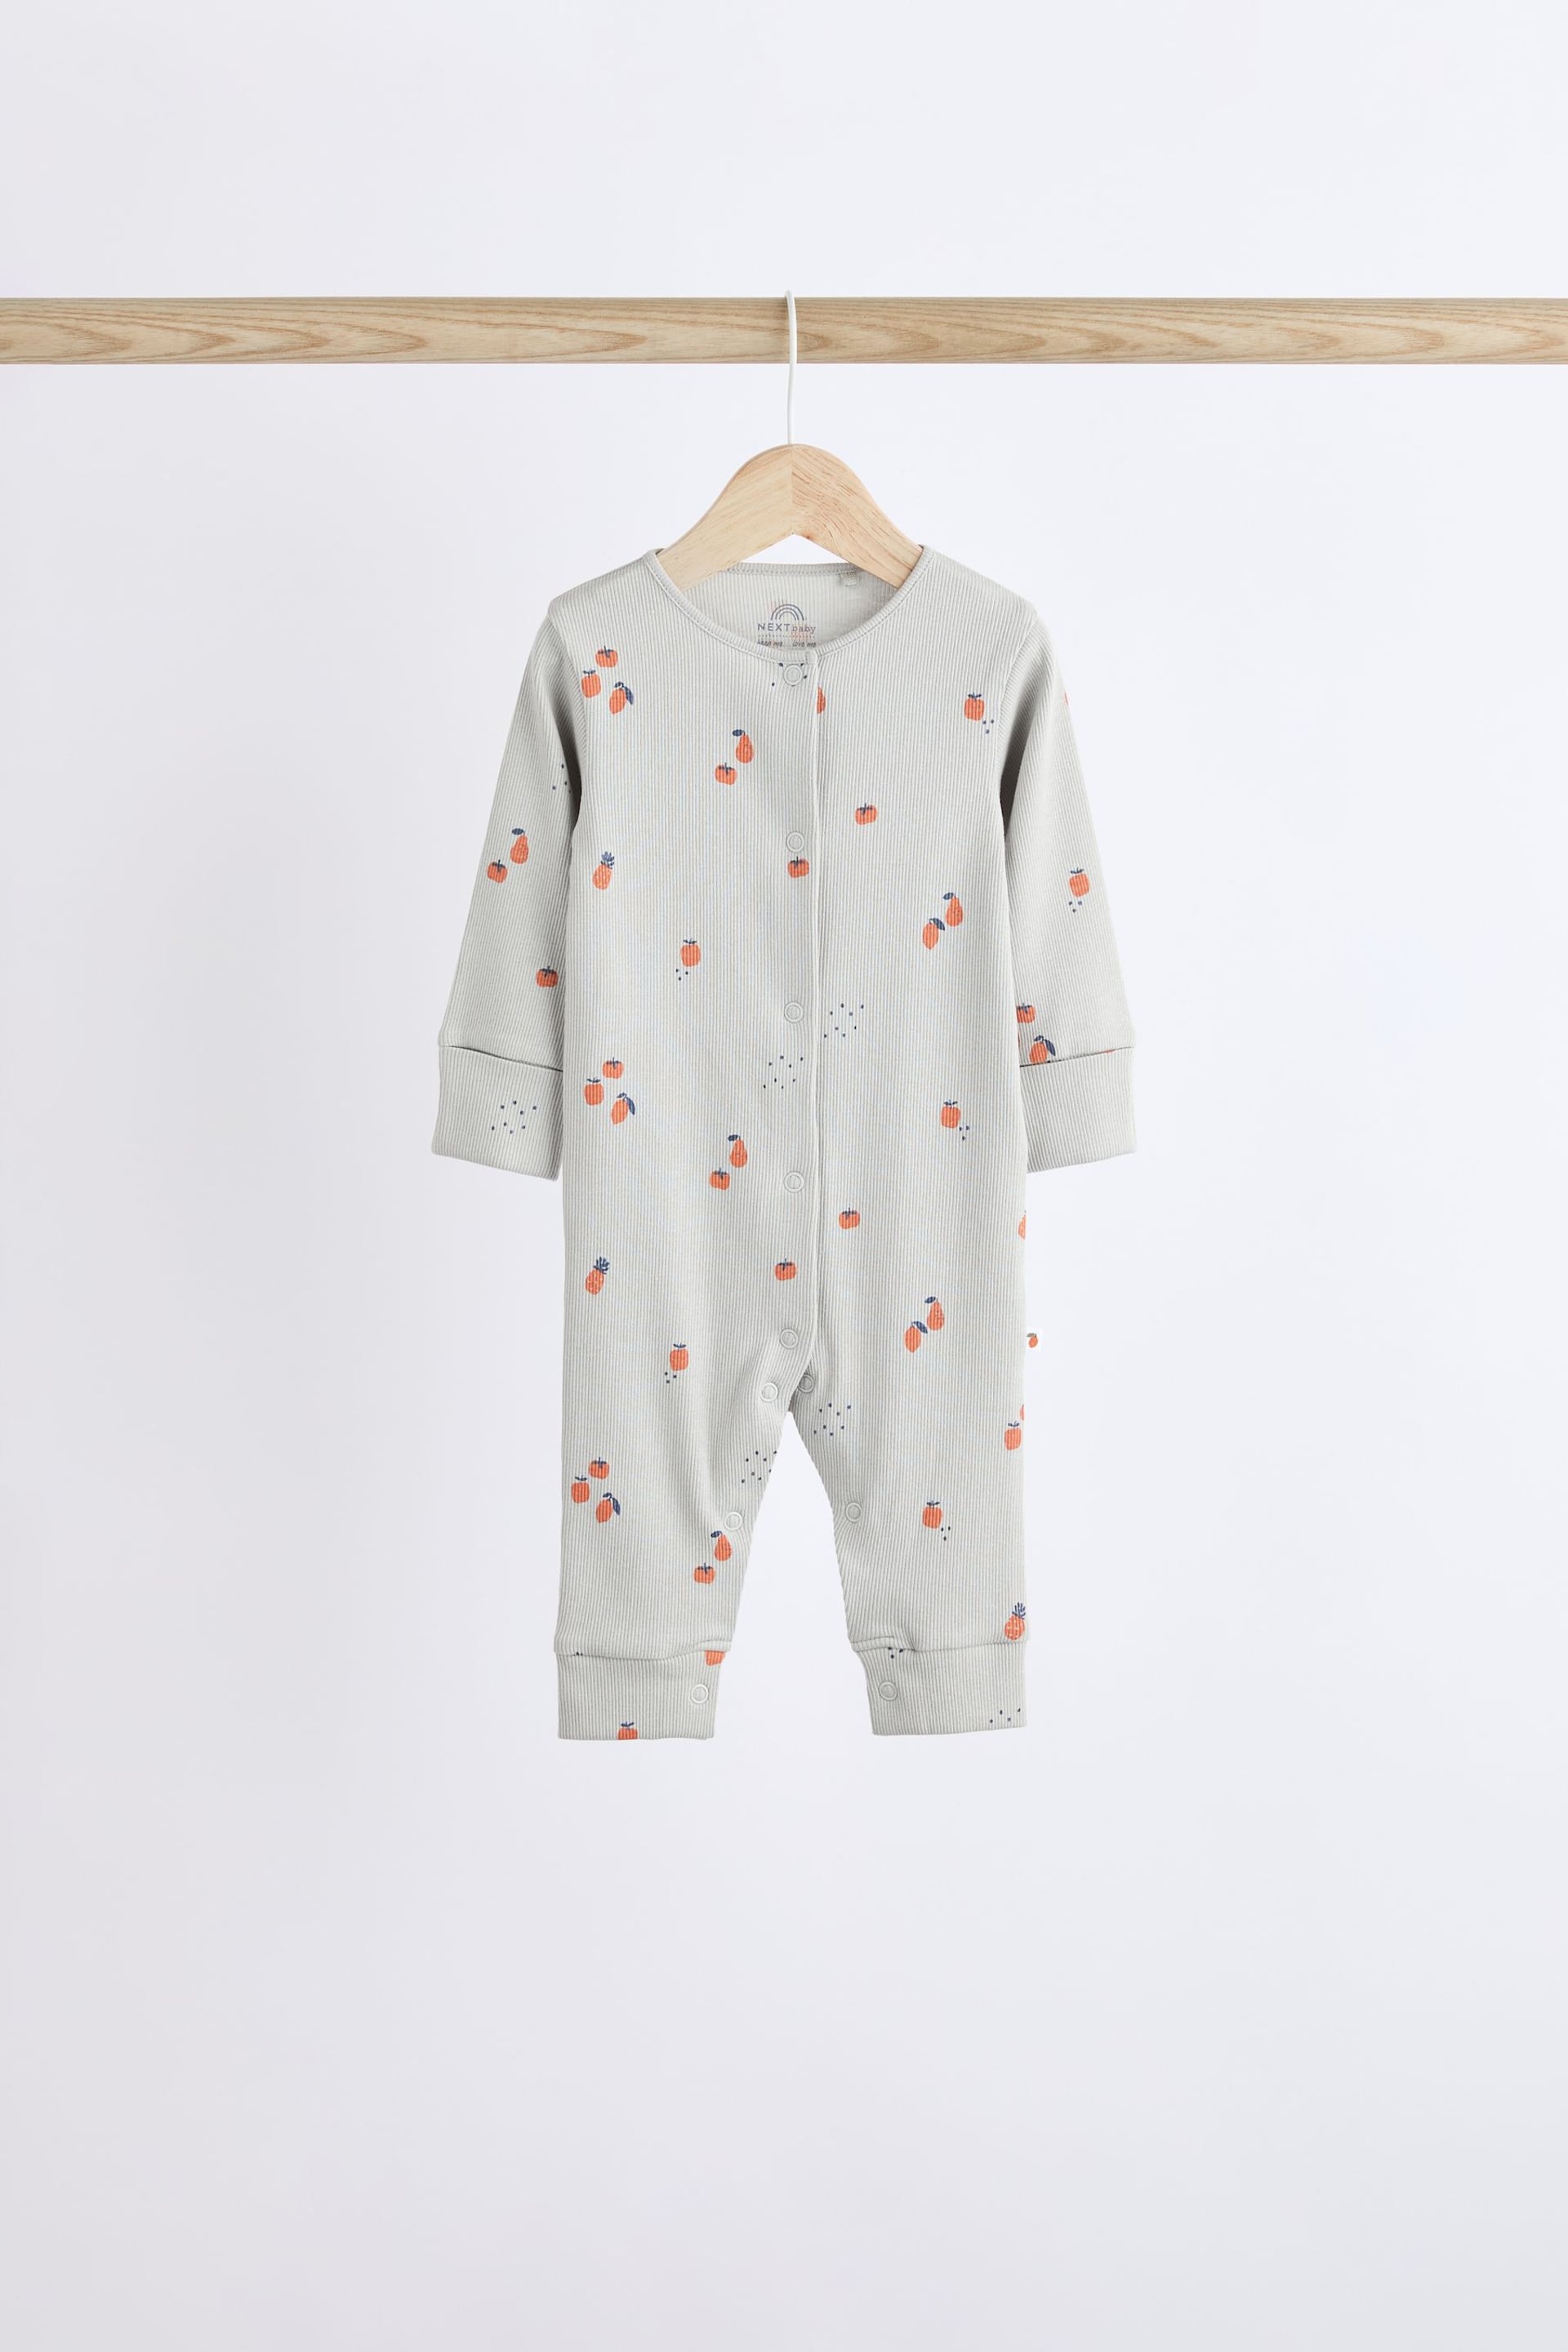 Green/Orange Baby Footless Sleepsuits 5 Pack (0mths-3yrs) - Image 5 of 12